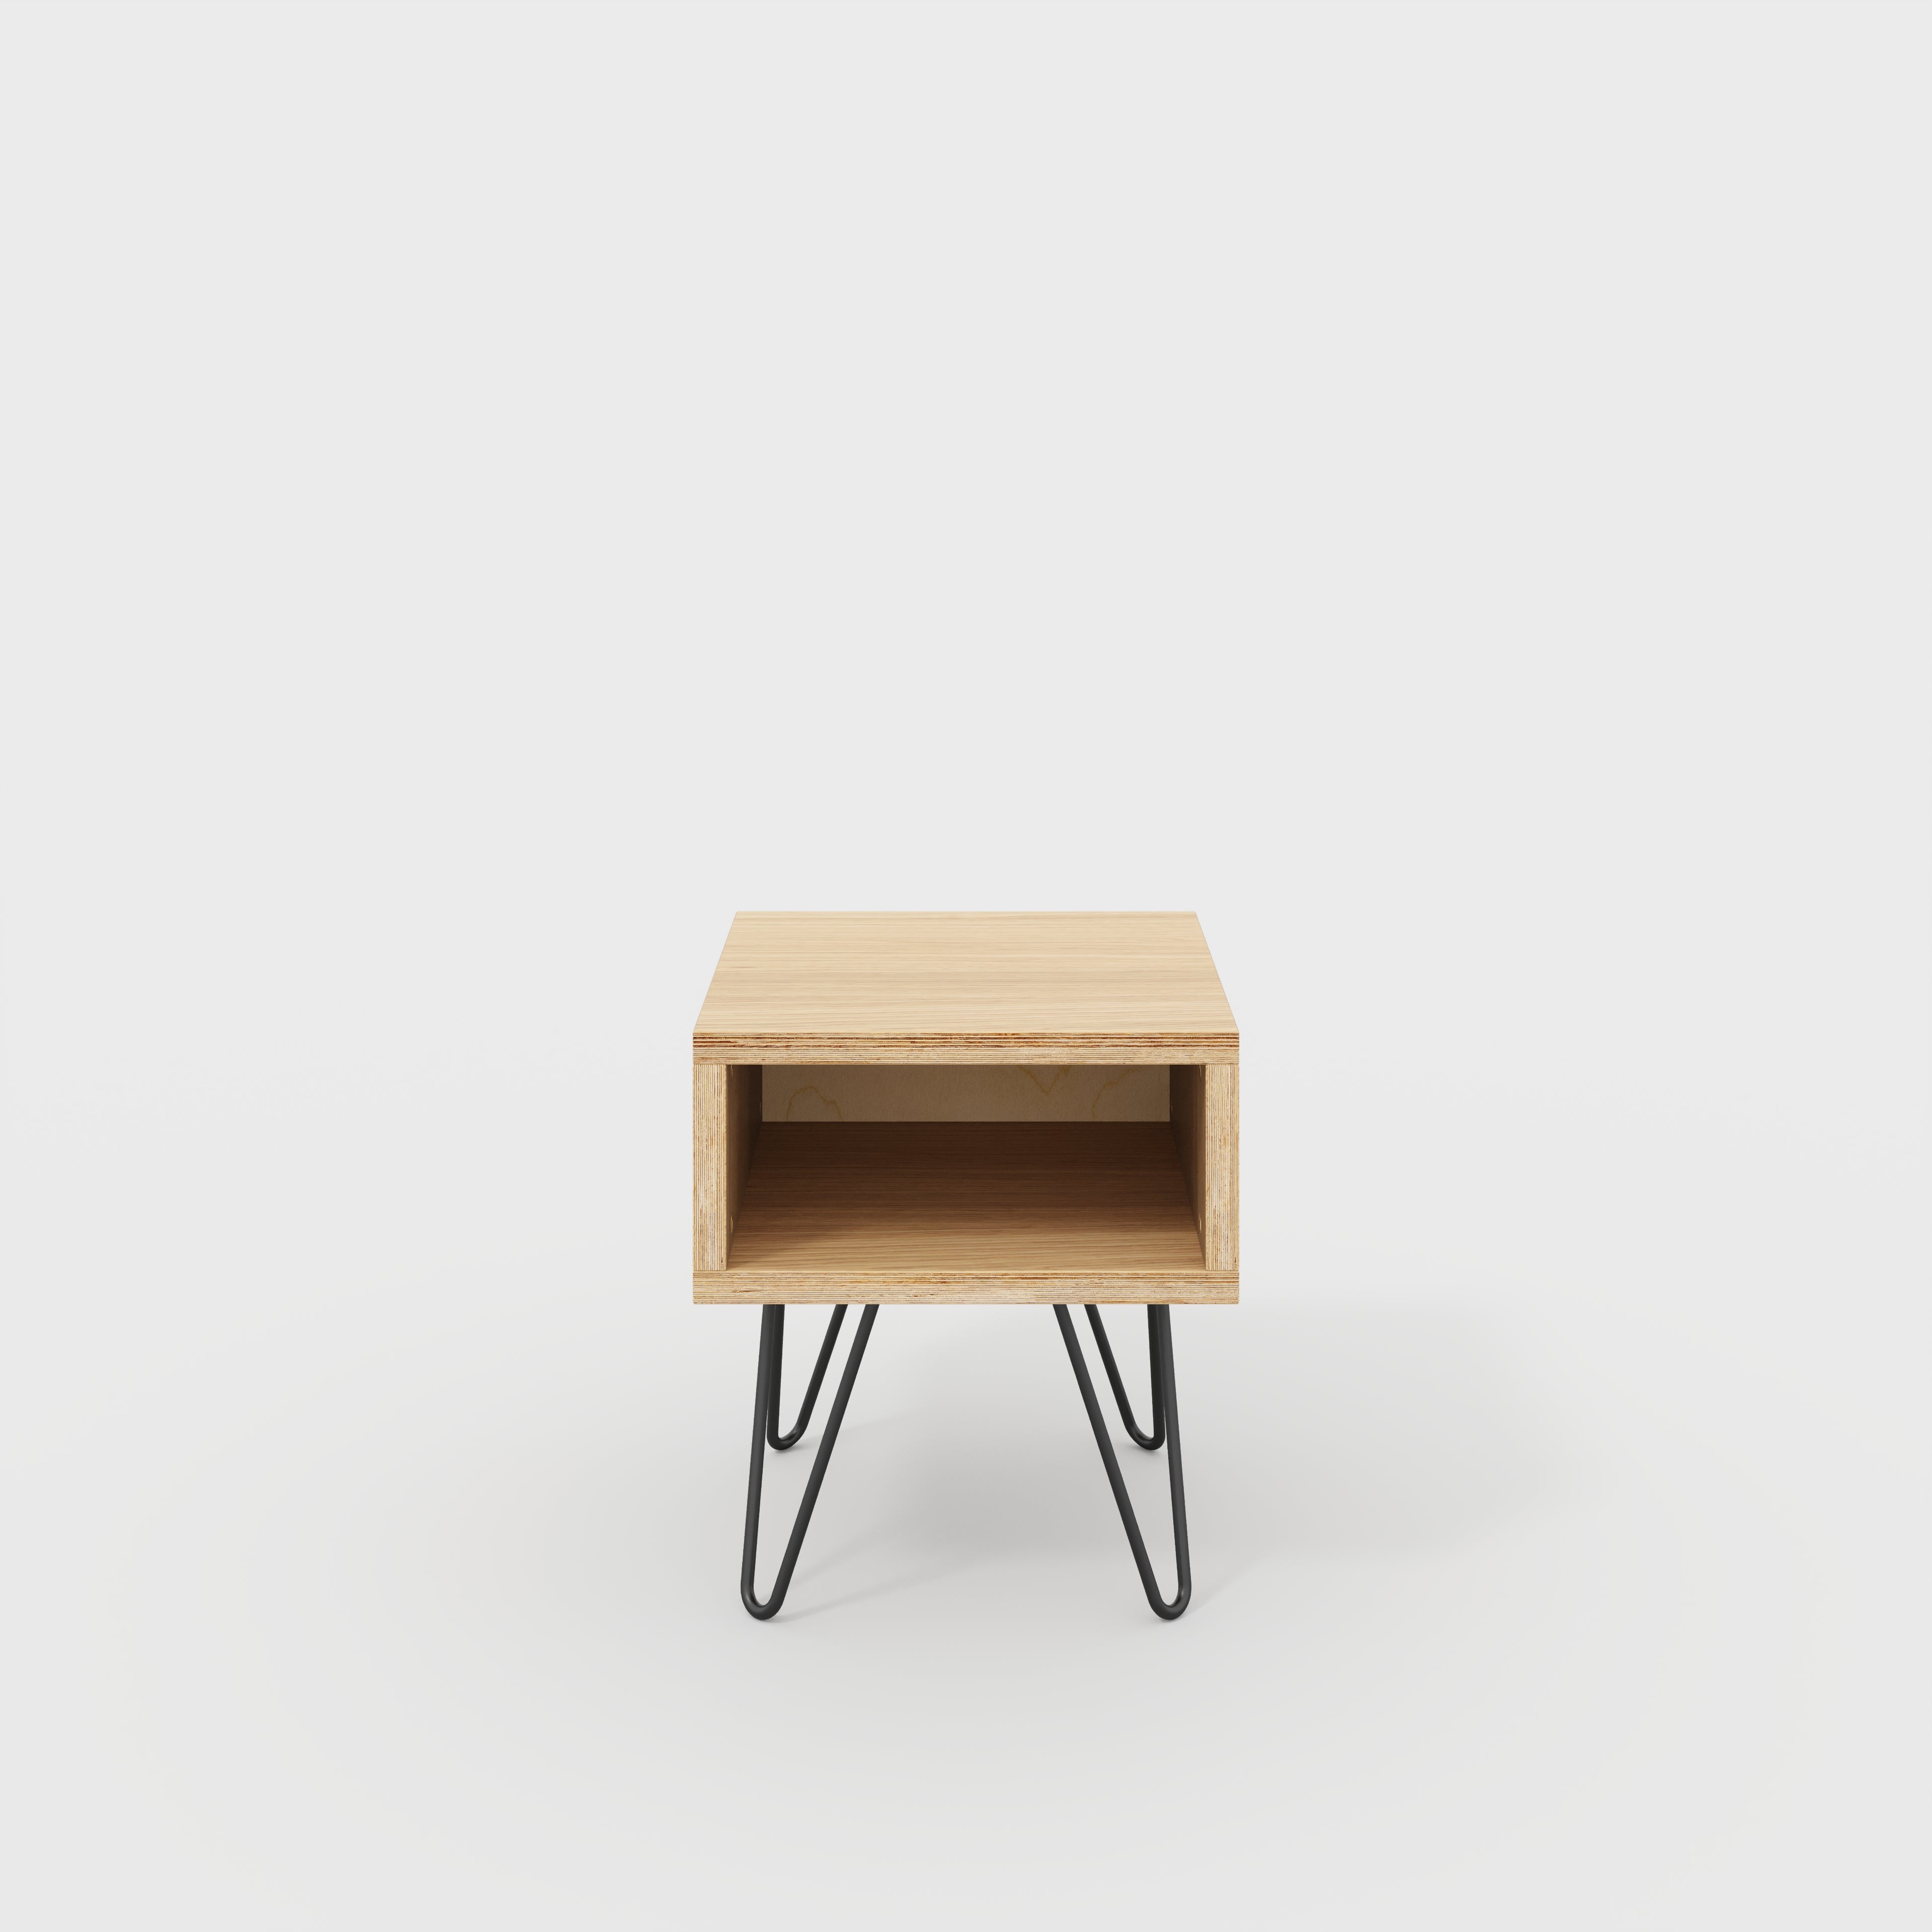 Bedside Table with Box Storage and Black Hairpin Legs - Plywood Oak - 400(w) x 400(d) x 450(h)